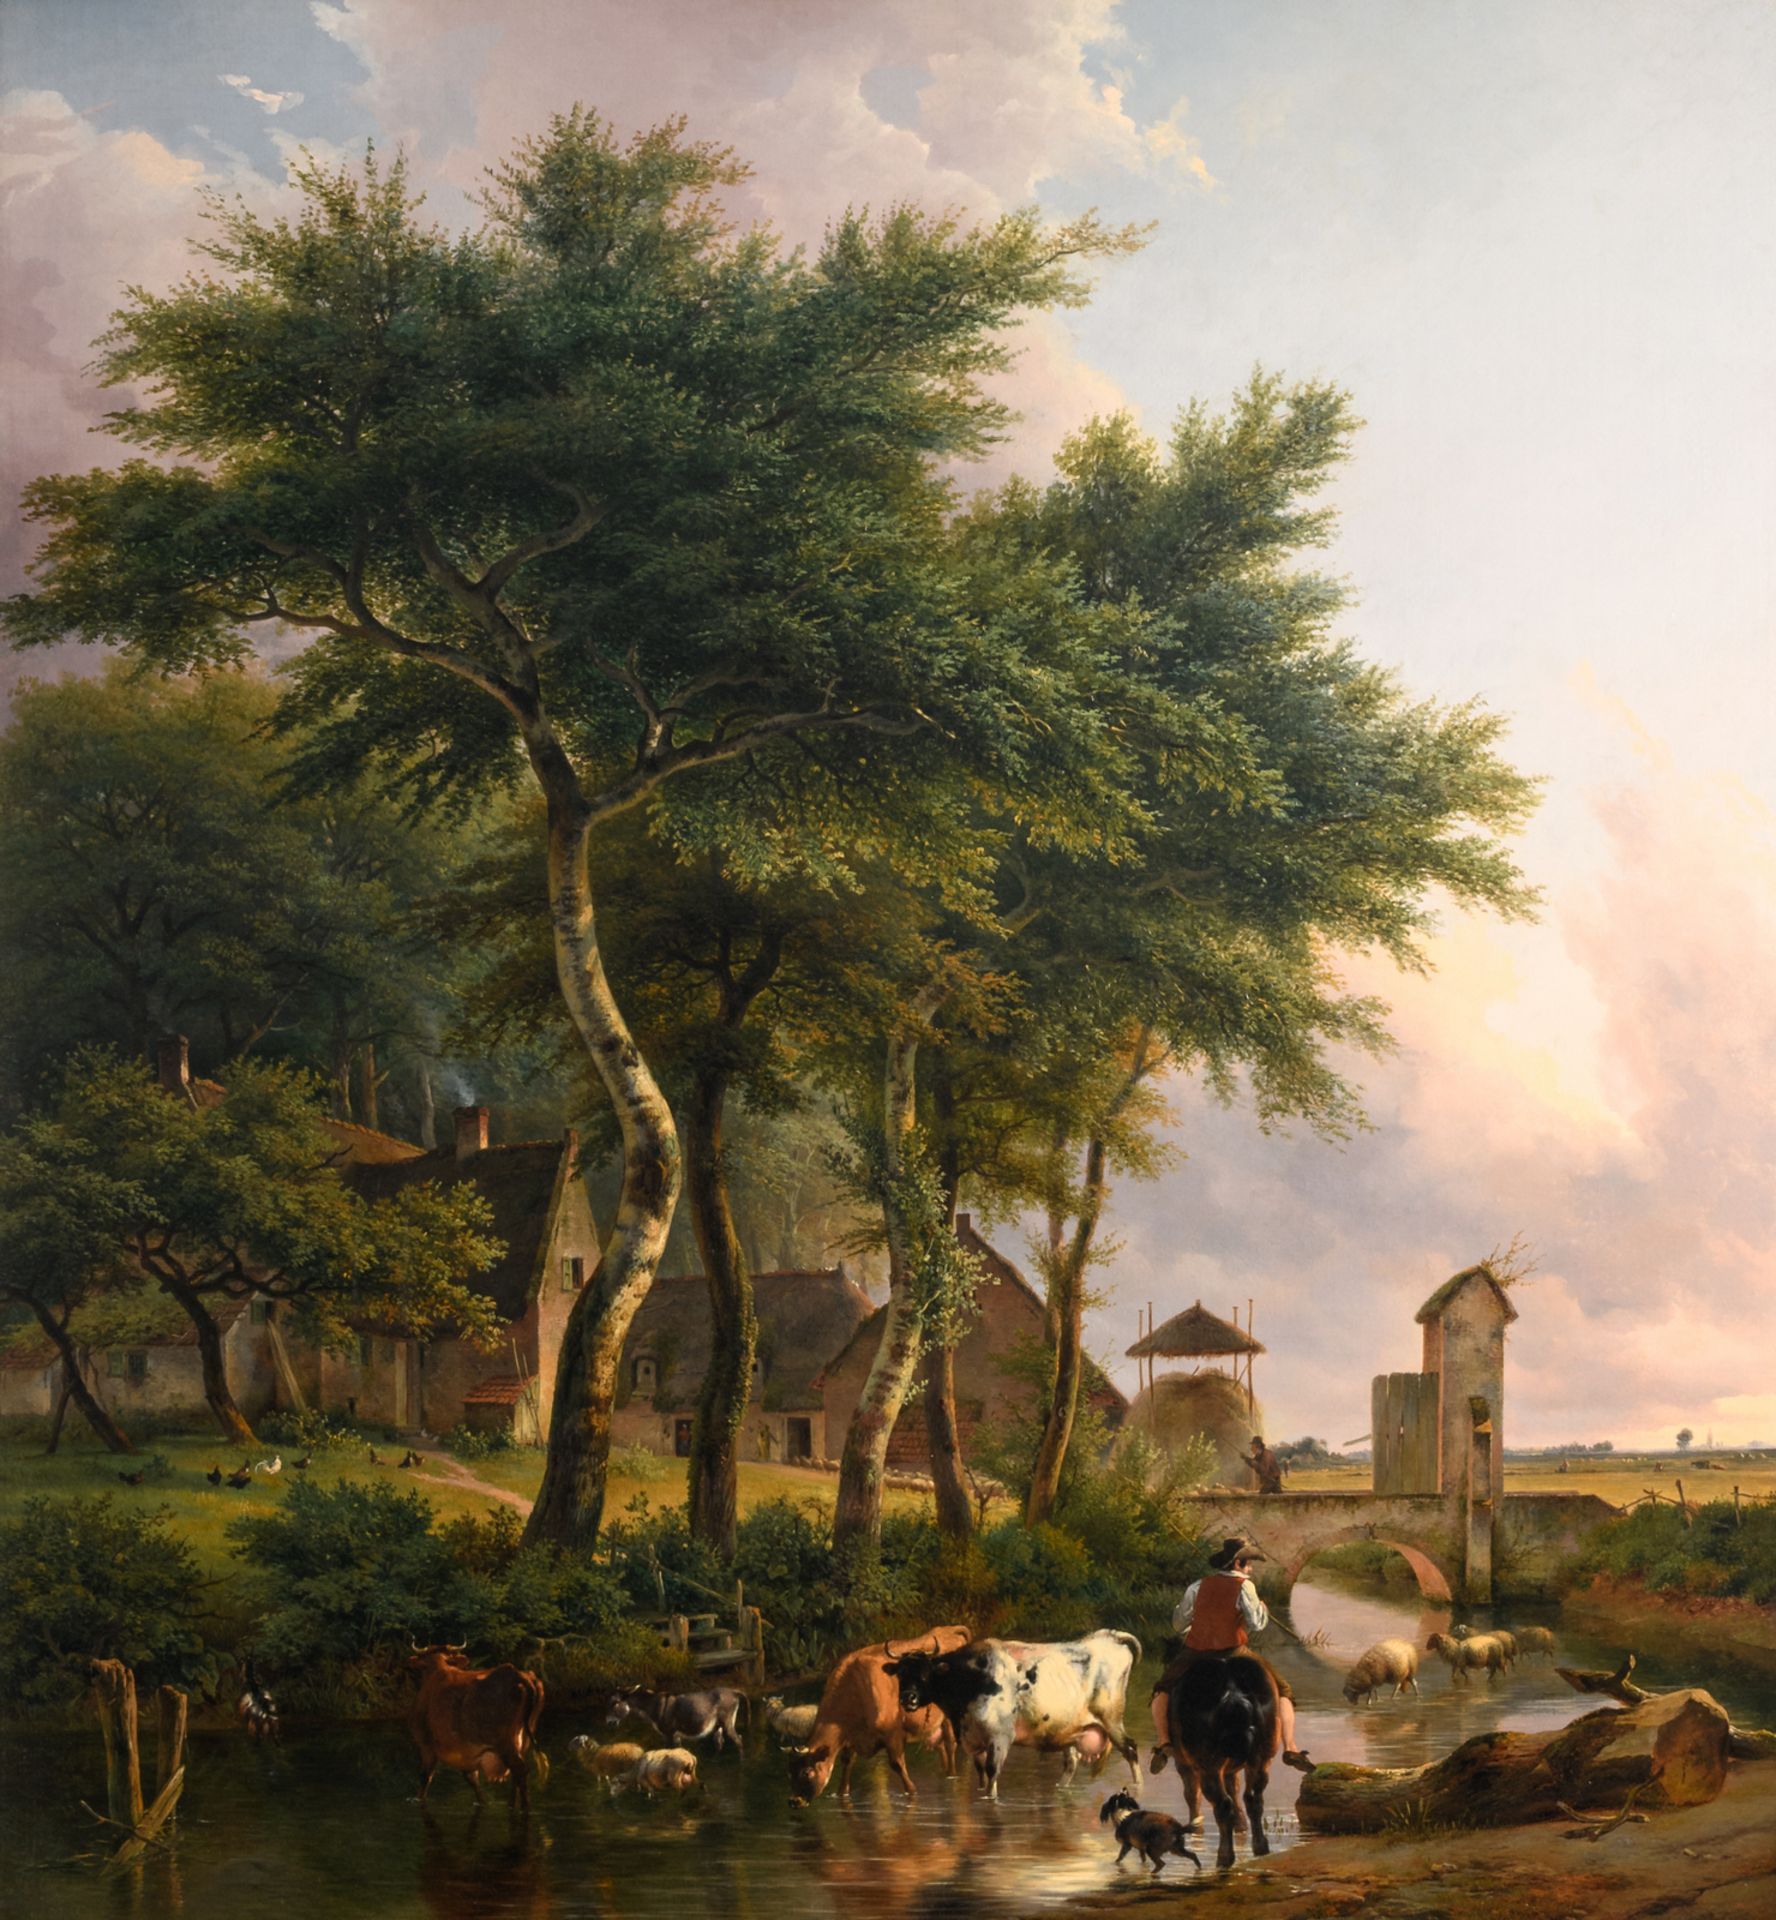 Verboeckhoven E. and De Jonghe J.B., the return of the cattle, oil on canvas, dated 1834, 130 x